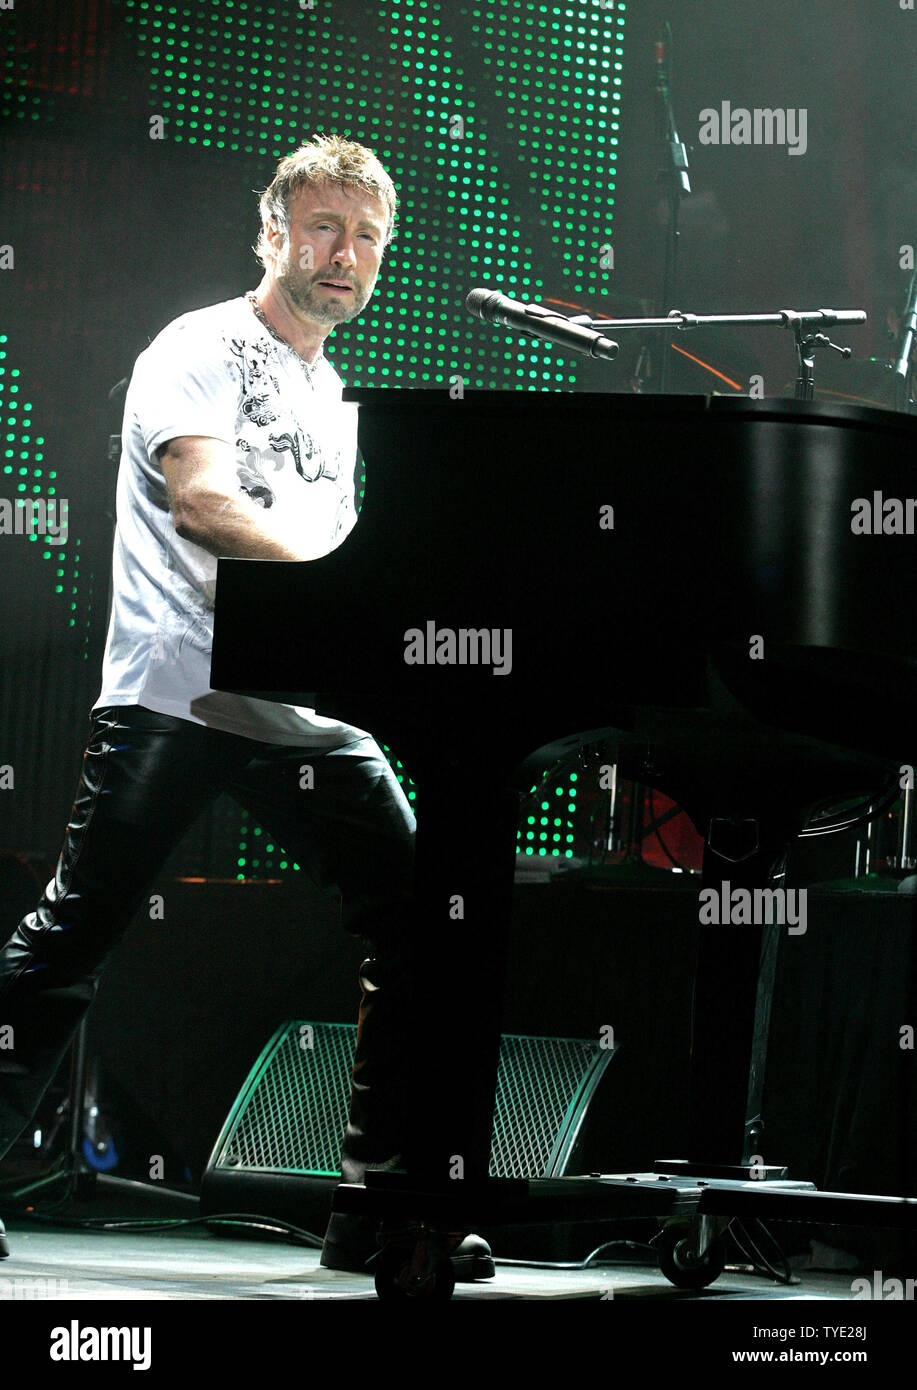 Paul Rodgers with Bad Company performs in concert at the Seminole Hard Rock Hotel and Casino in Hollywood, Florida on April 17, 2009. (UPI Photo/Michael Bush) Stock Photo